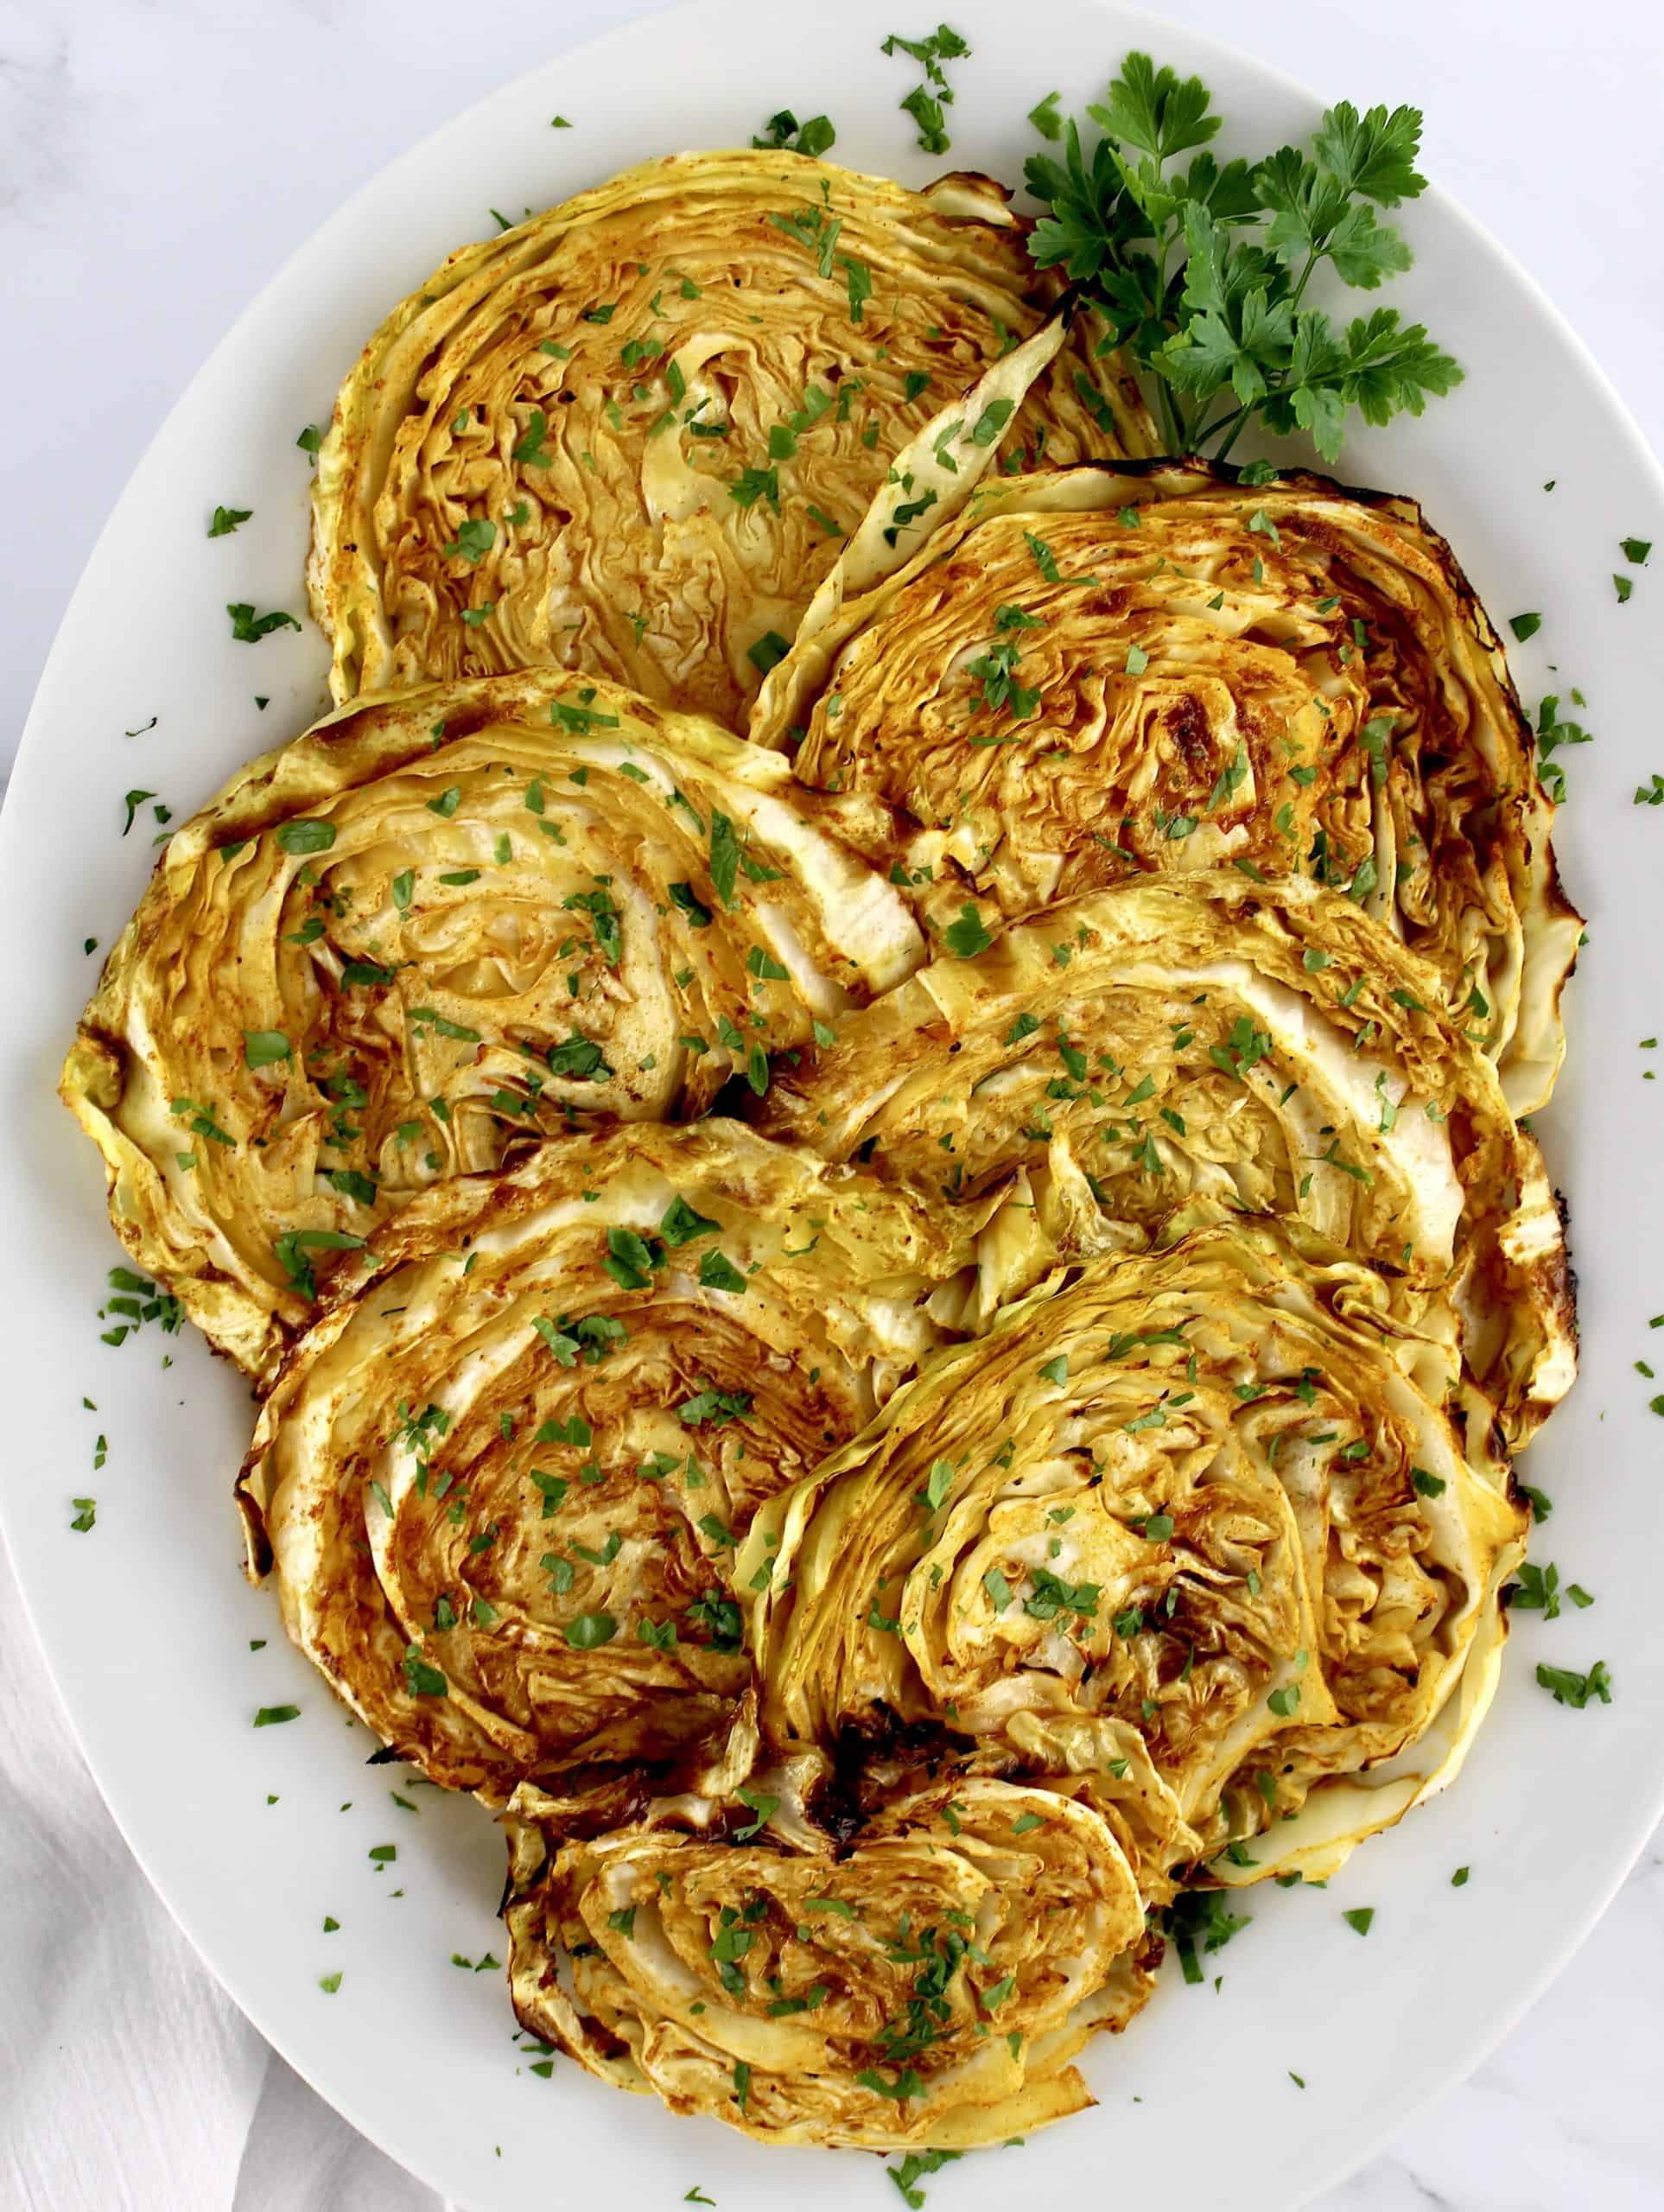 7 Roasted Cabbage Steaks on white plate with parsley garnish